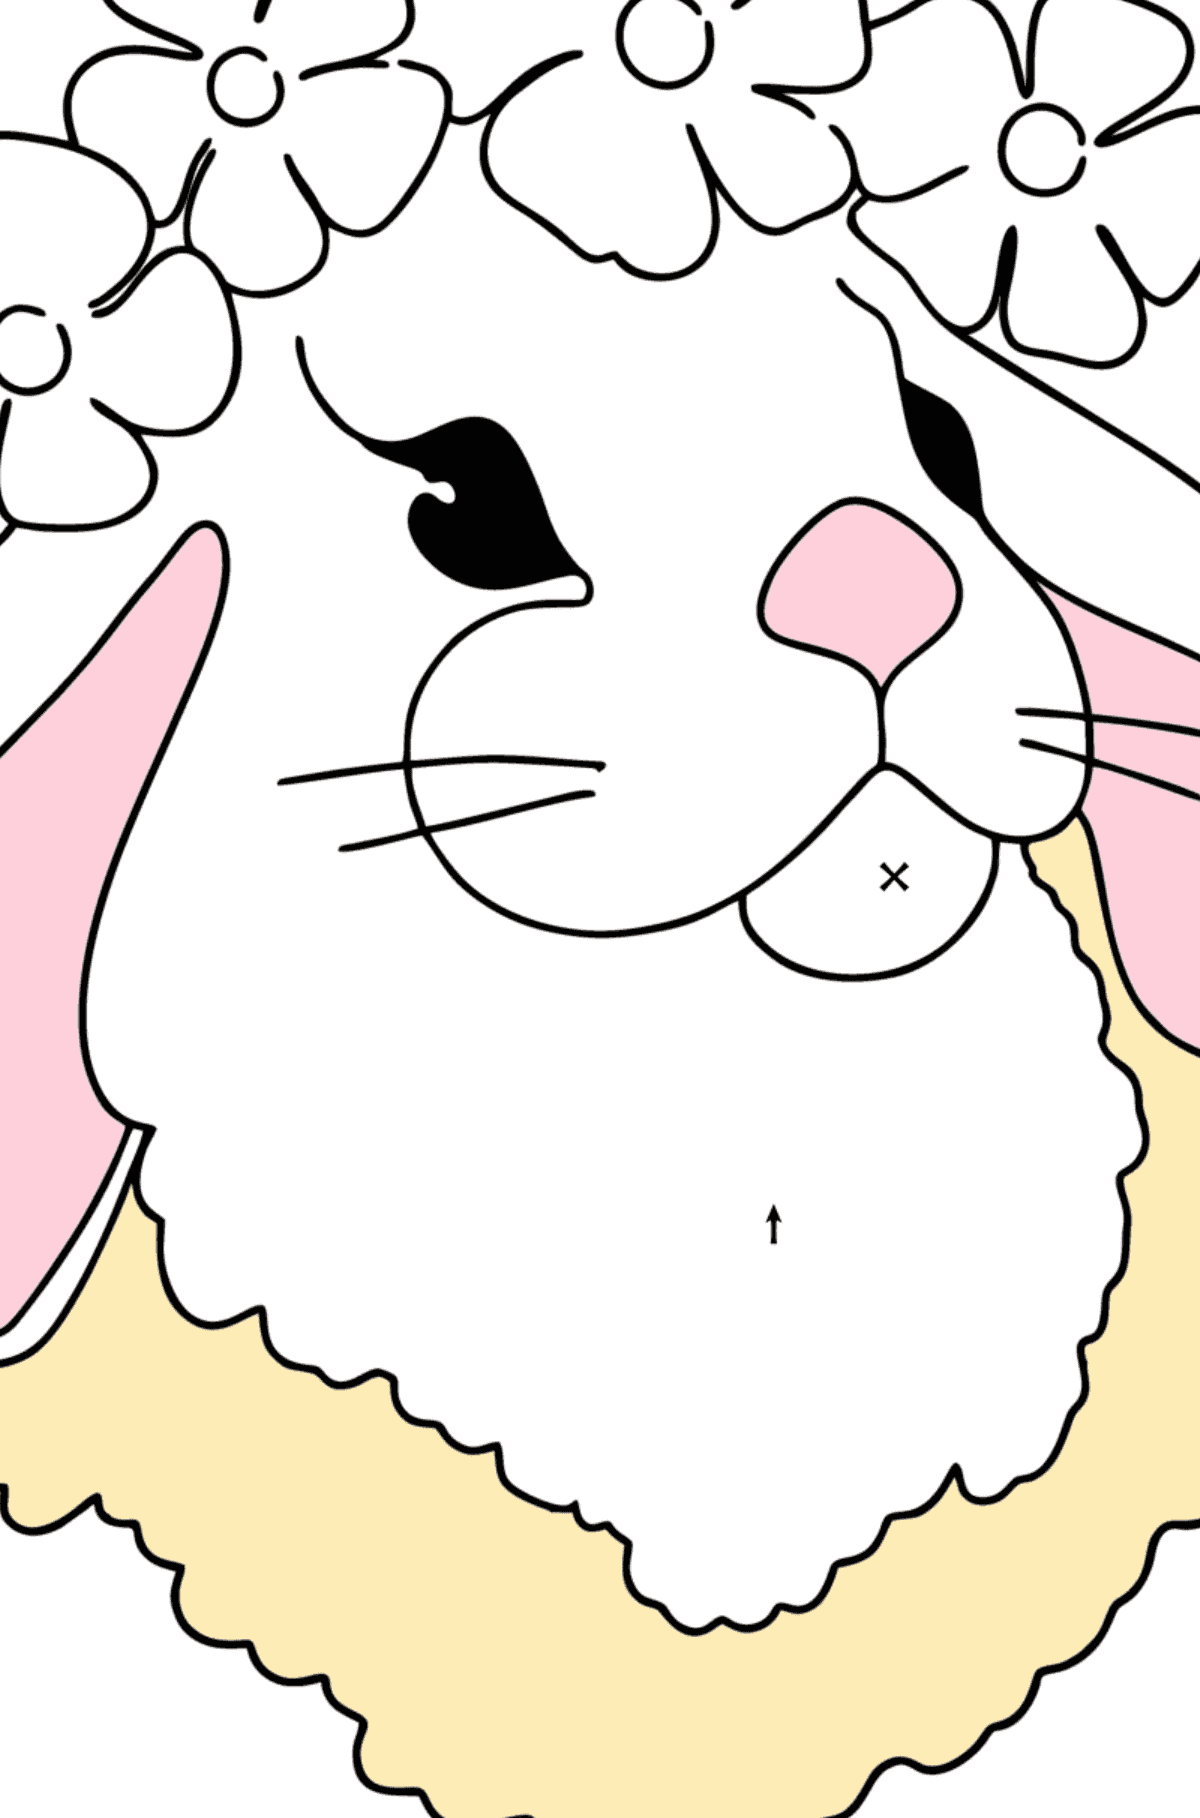 Hare Face coloring page - Coloring by Symbols for Kids